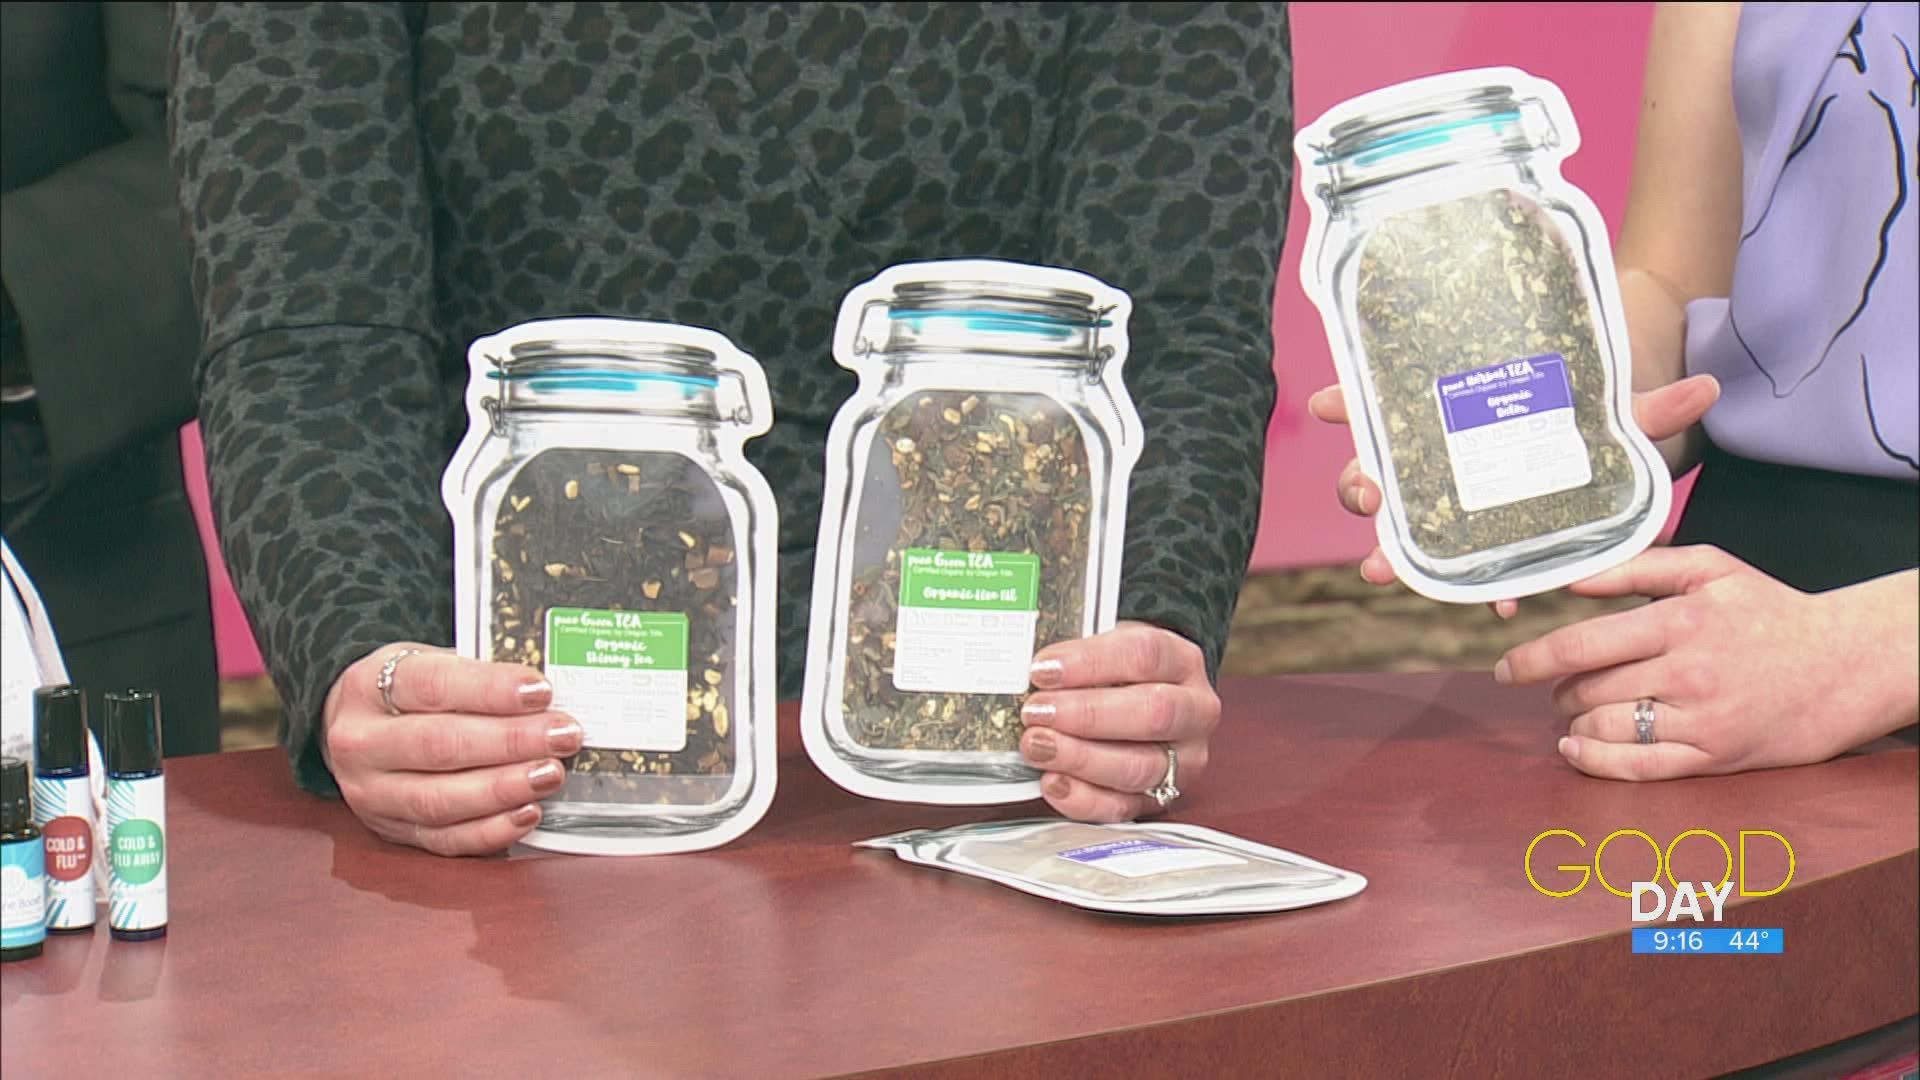 Angela Hill from Wellaroma in Perrysburg talks how essential oils and plants can offer relaxation and wellness.